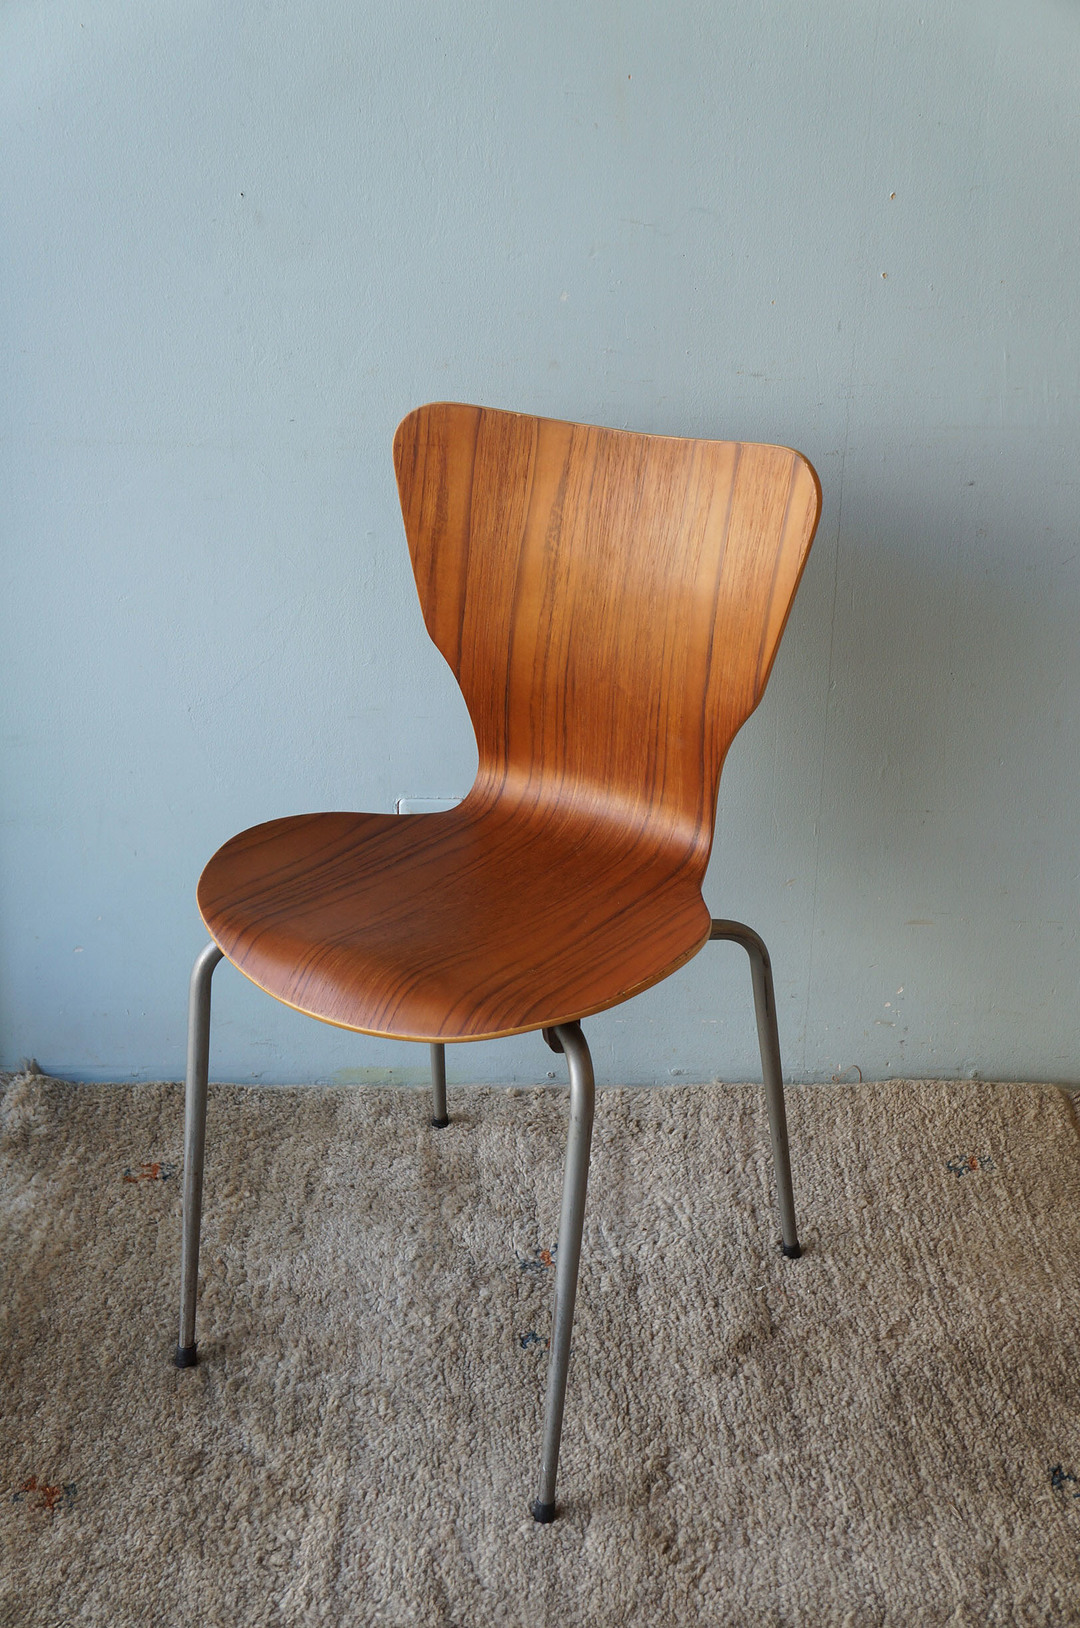 Danish Vintage Teak Plywood Stacking Chair MH Stålmøbler/デンマークヴィンテージ スタッキングチェア チーク材 プライウッド 椅子 ミッドセンチュリー モダン 北欧家具 2